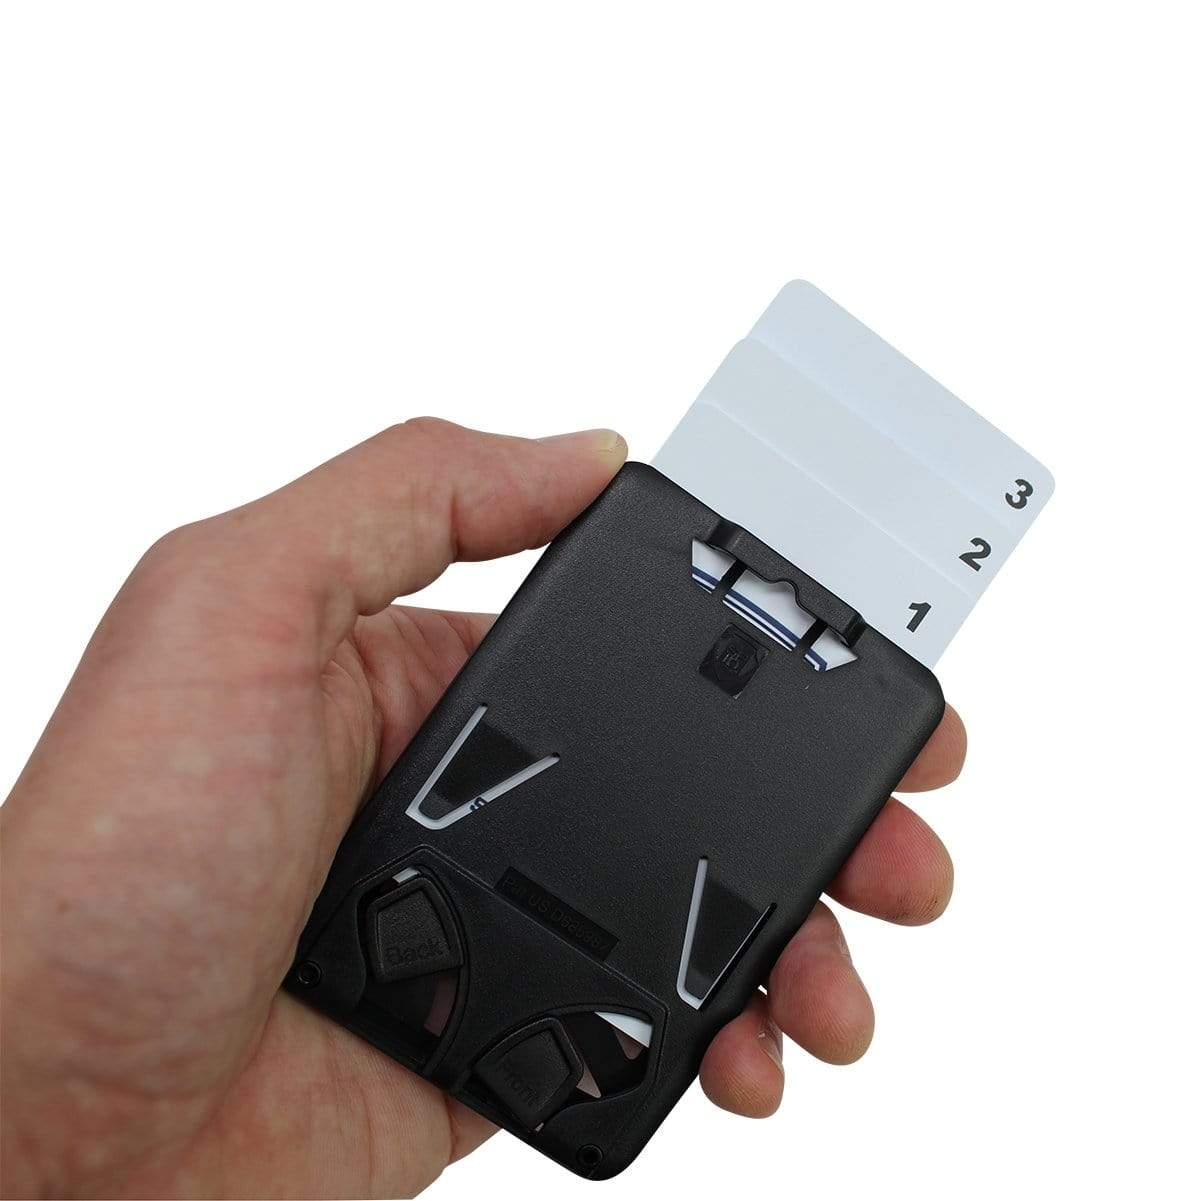 A hand holds a Hard Plastic 3 Card Badge Holder with Badge Reel - Retractable ID Lanyard Features Belt Clip & Carabiner - Rigid Vertical CAC Holder - Top Load Holds Three Cards by SpecialistID with three white cards labeled 1, 2, and 3 partially inserted into the top.